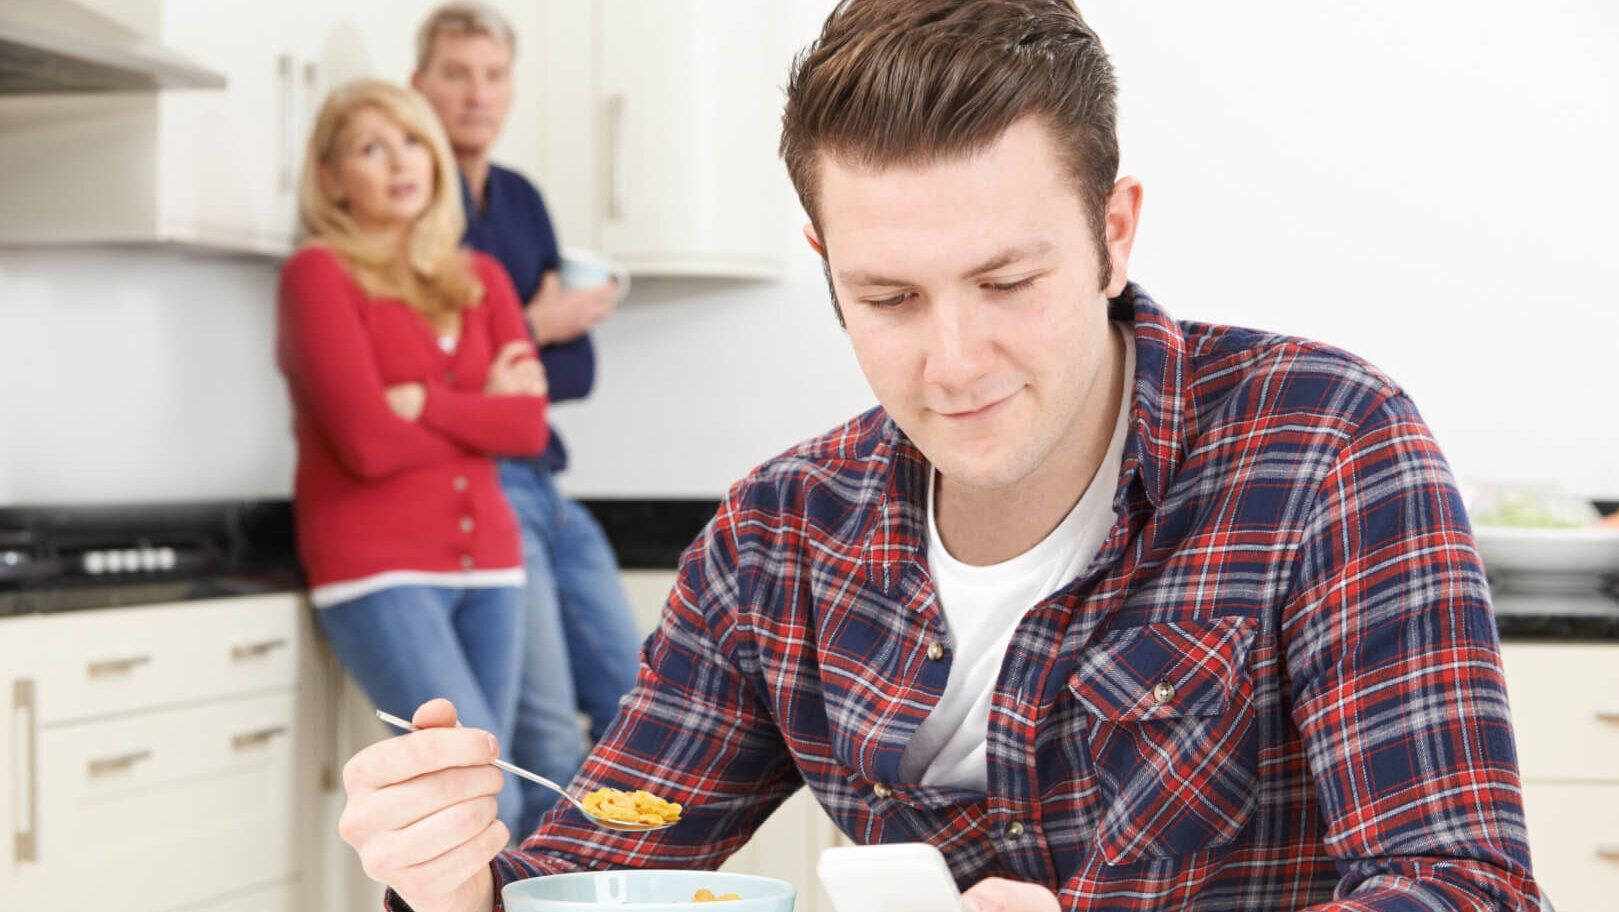 Parents frustrated with adult son living at home